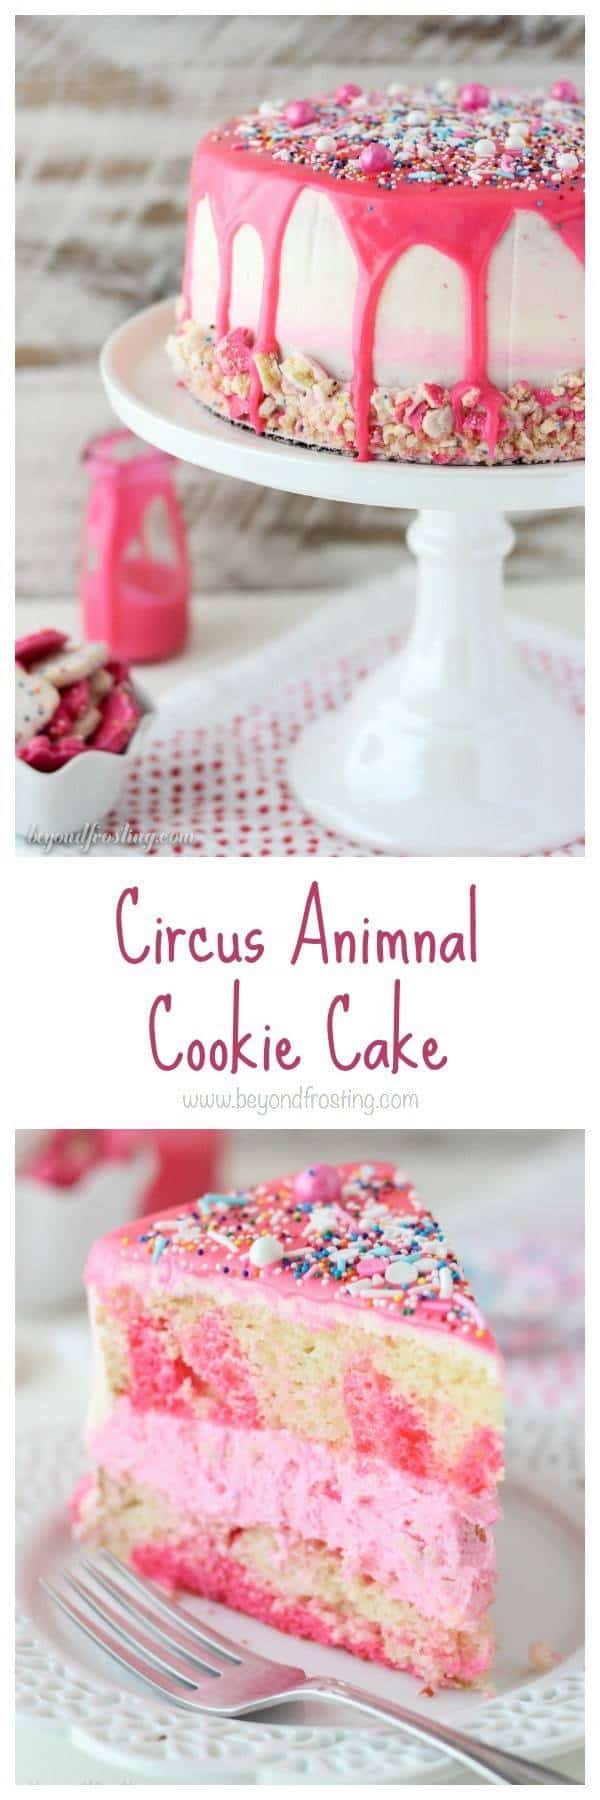 If you like Circus Animal Cookies, you will love this cake! It’s an easy vanilla tye dye cake, vanilla buttercream and Circus Animal cookies. It’s covered in a pink chocolate ganache and sprinkles. 